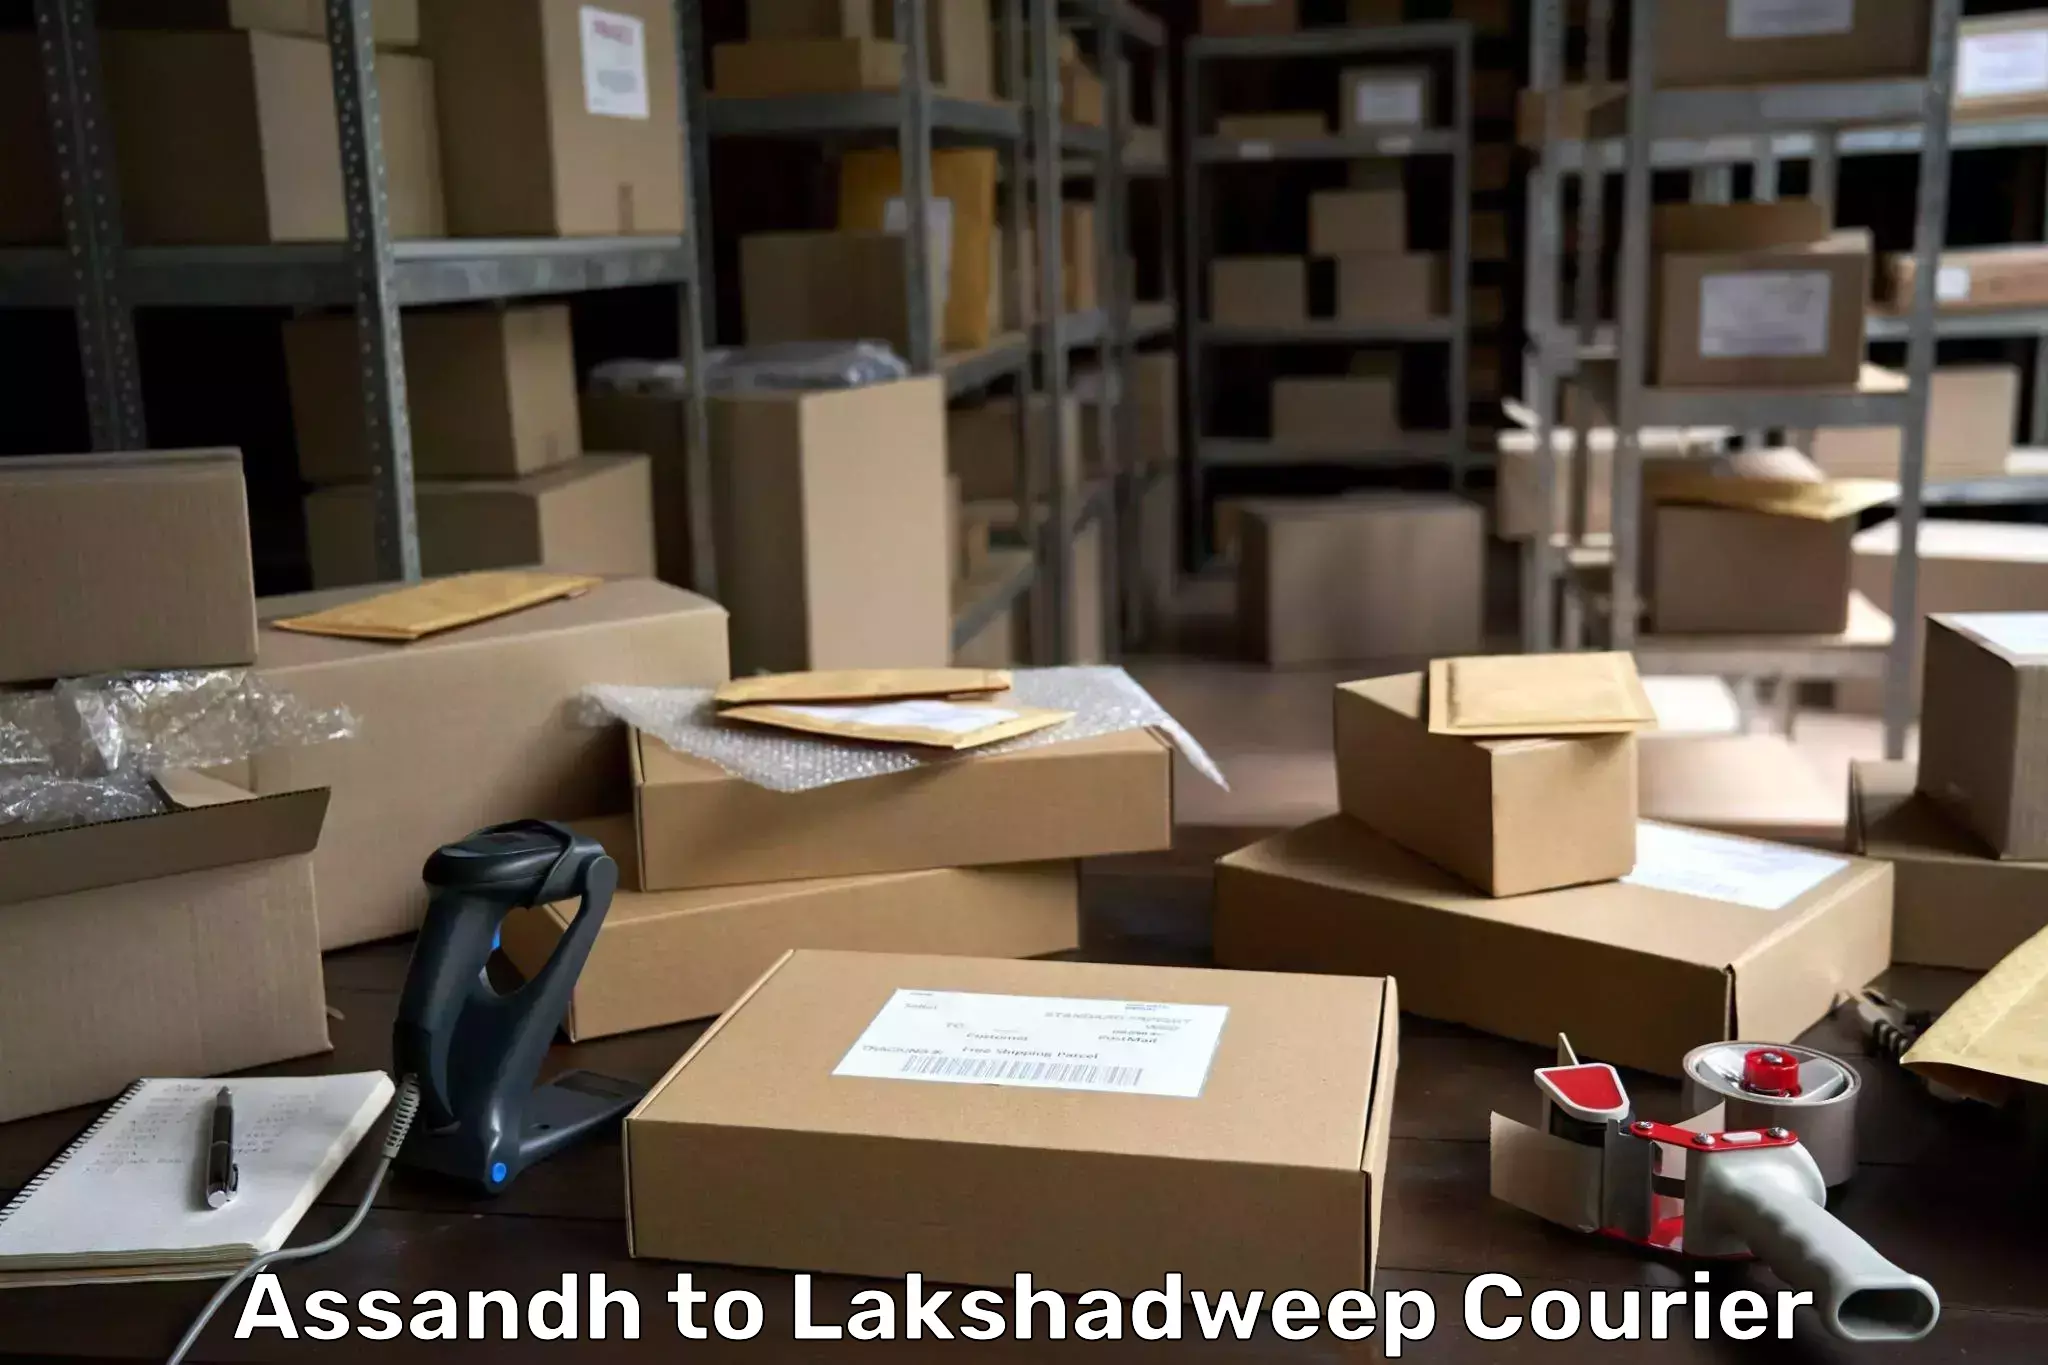 24-hour courier service Assandh to Lakshadweep